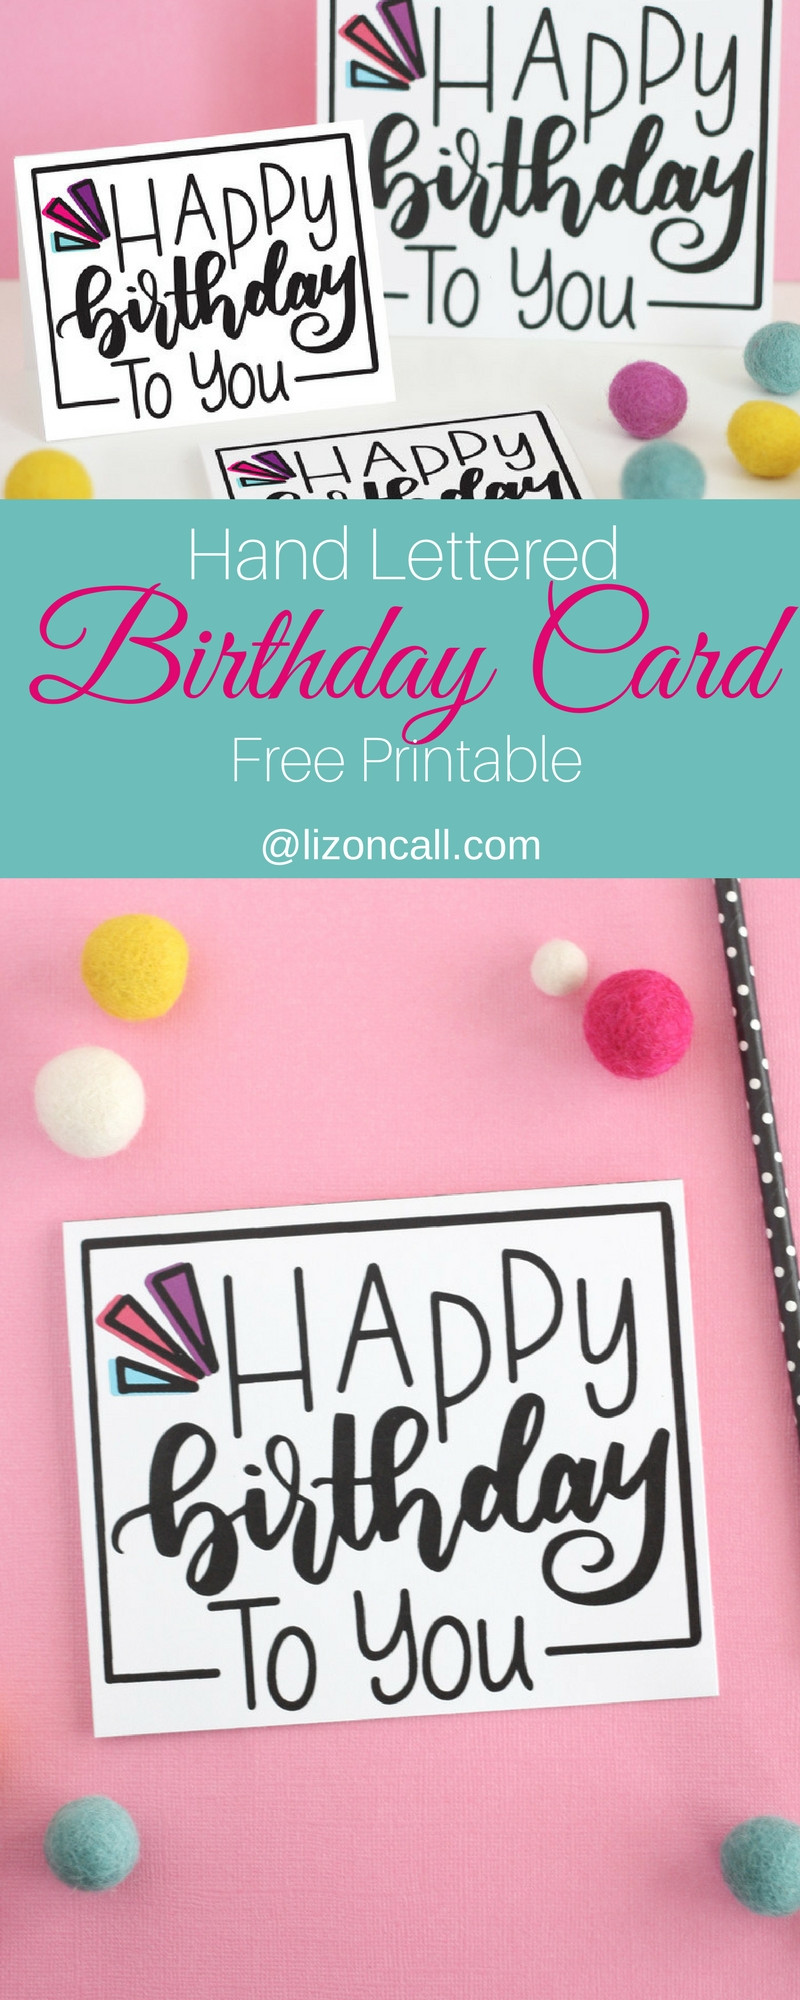 Birthday Cards Free
 Hand Lettered Free Printable Birthday Card Liz on Call